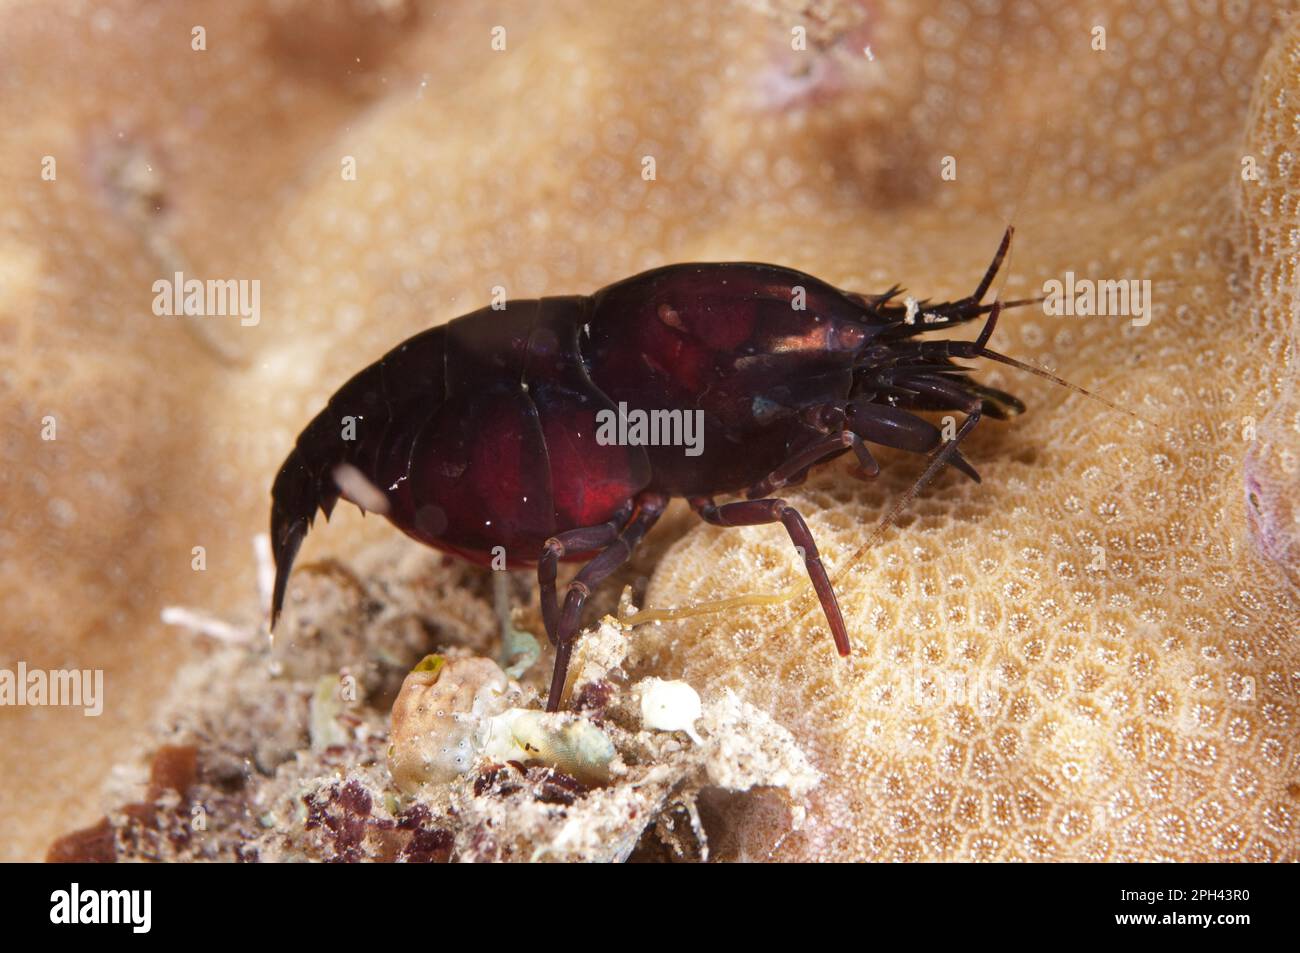 Deman's Snapping Shrimp, Deman's Snapping Shrimp, Other animals, Crustaceans, Animals, Deman's Snapping Shrimp (Synalpheus demani) adult, on reef at Stock Photo